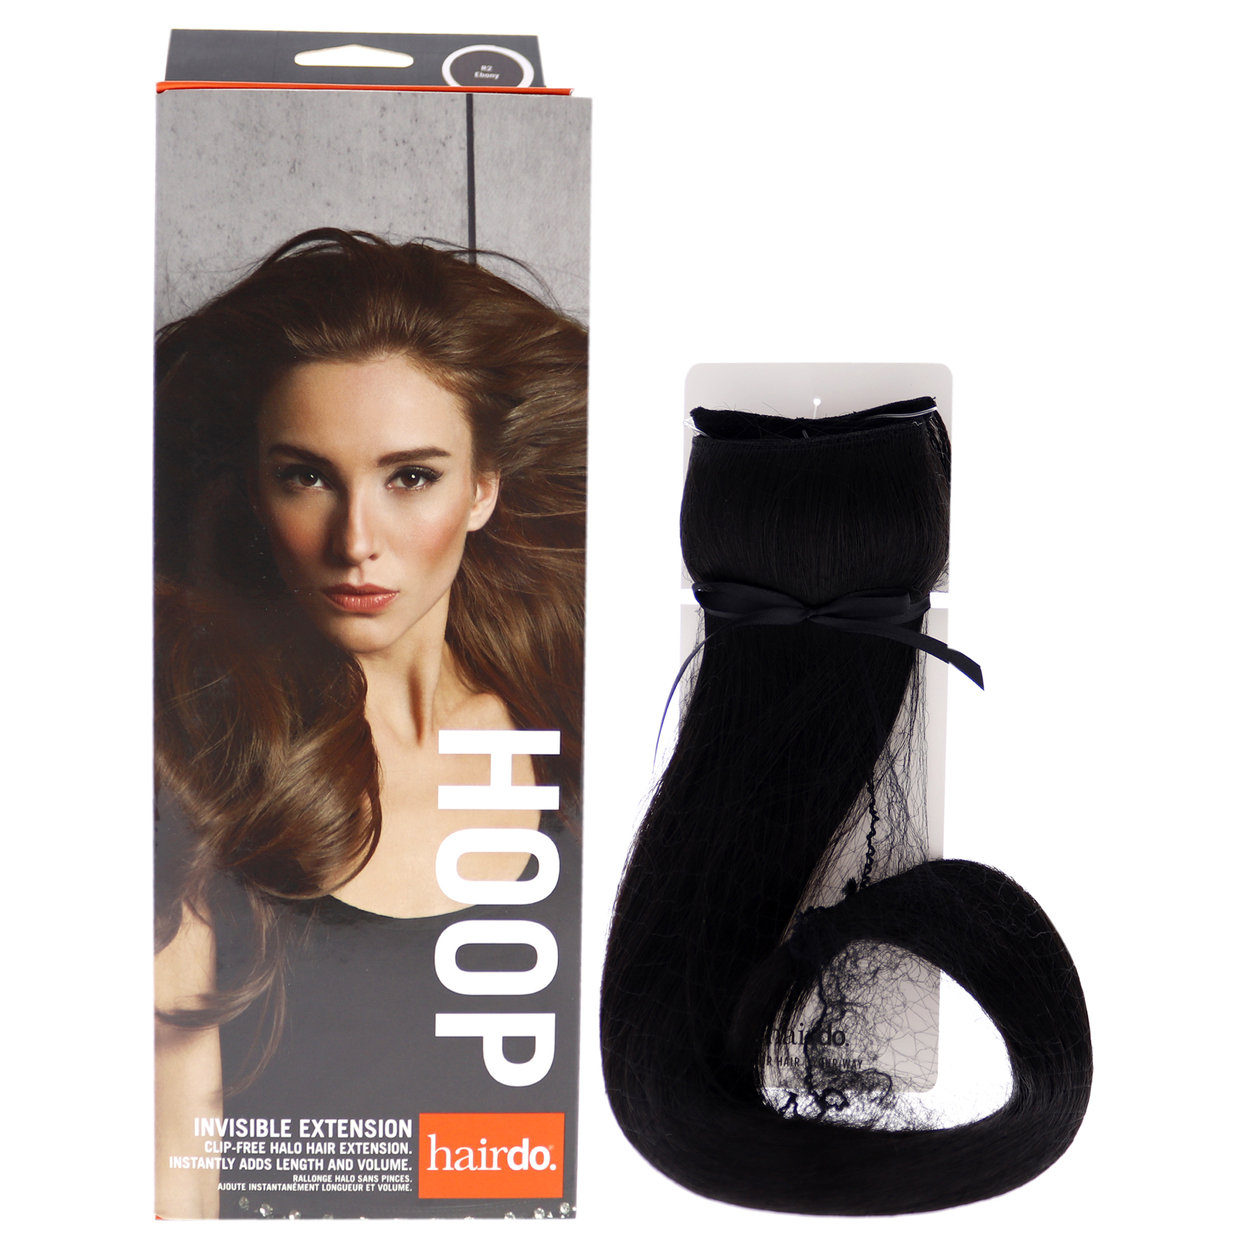 Hairdo Invisible Extension - R2 Ebony Hair Extension 1 Pc